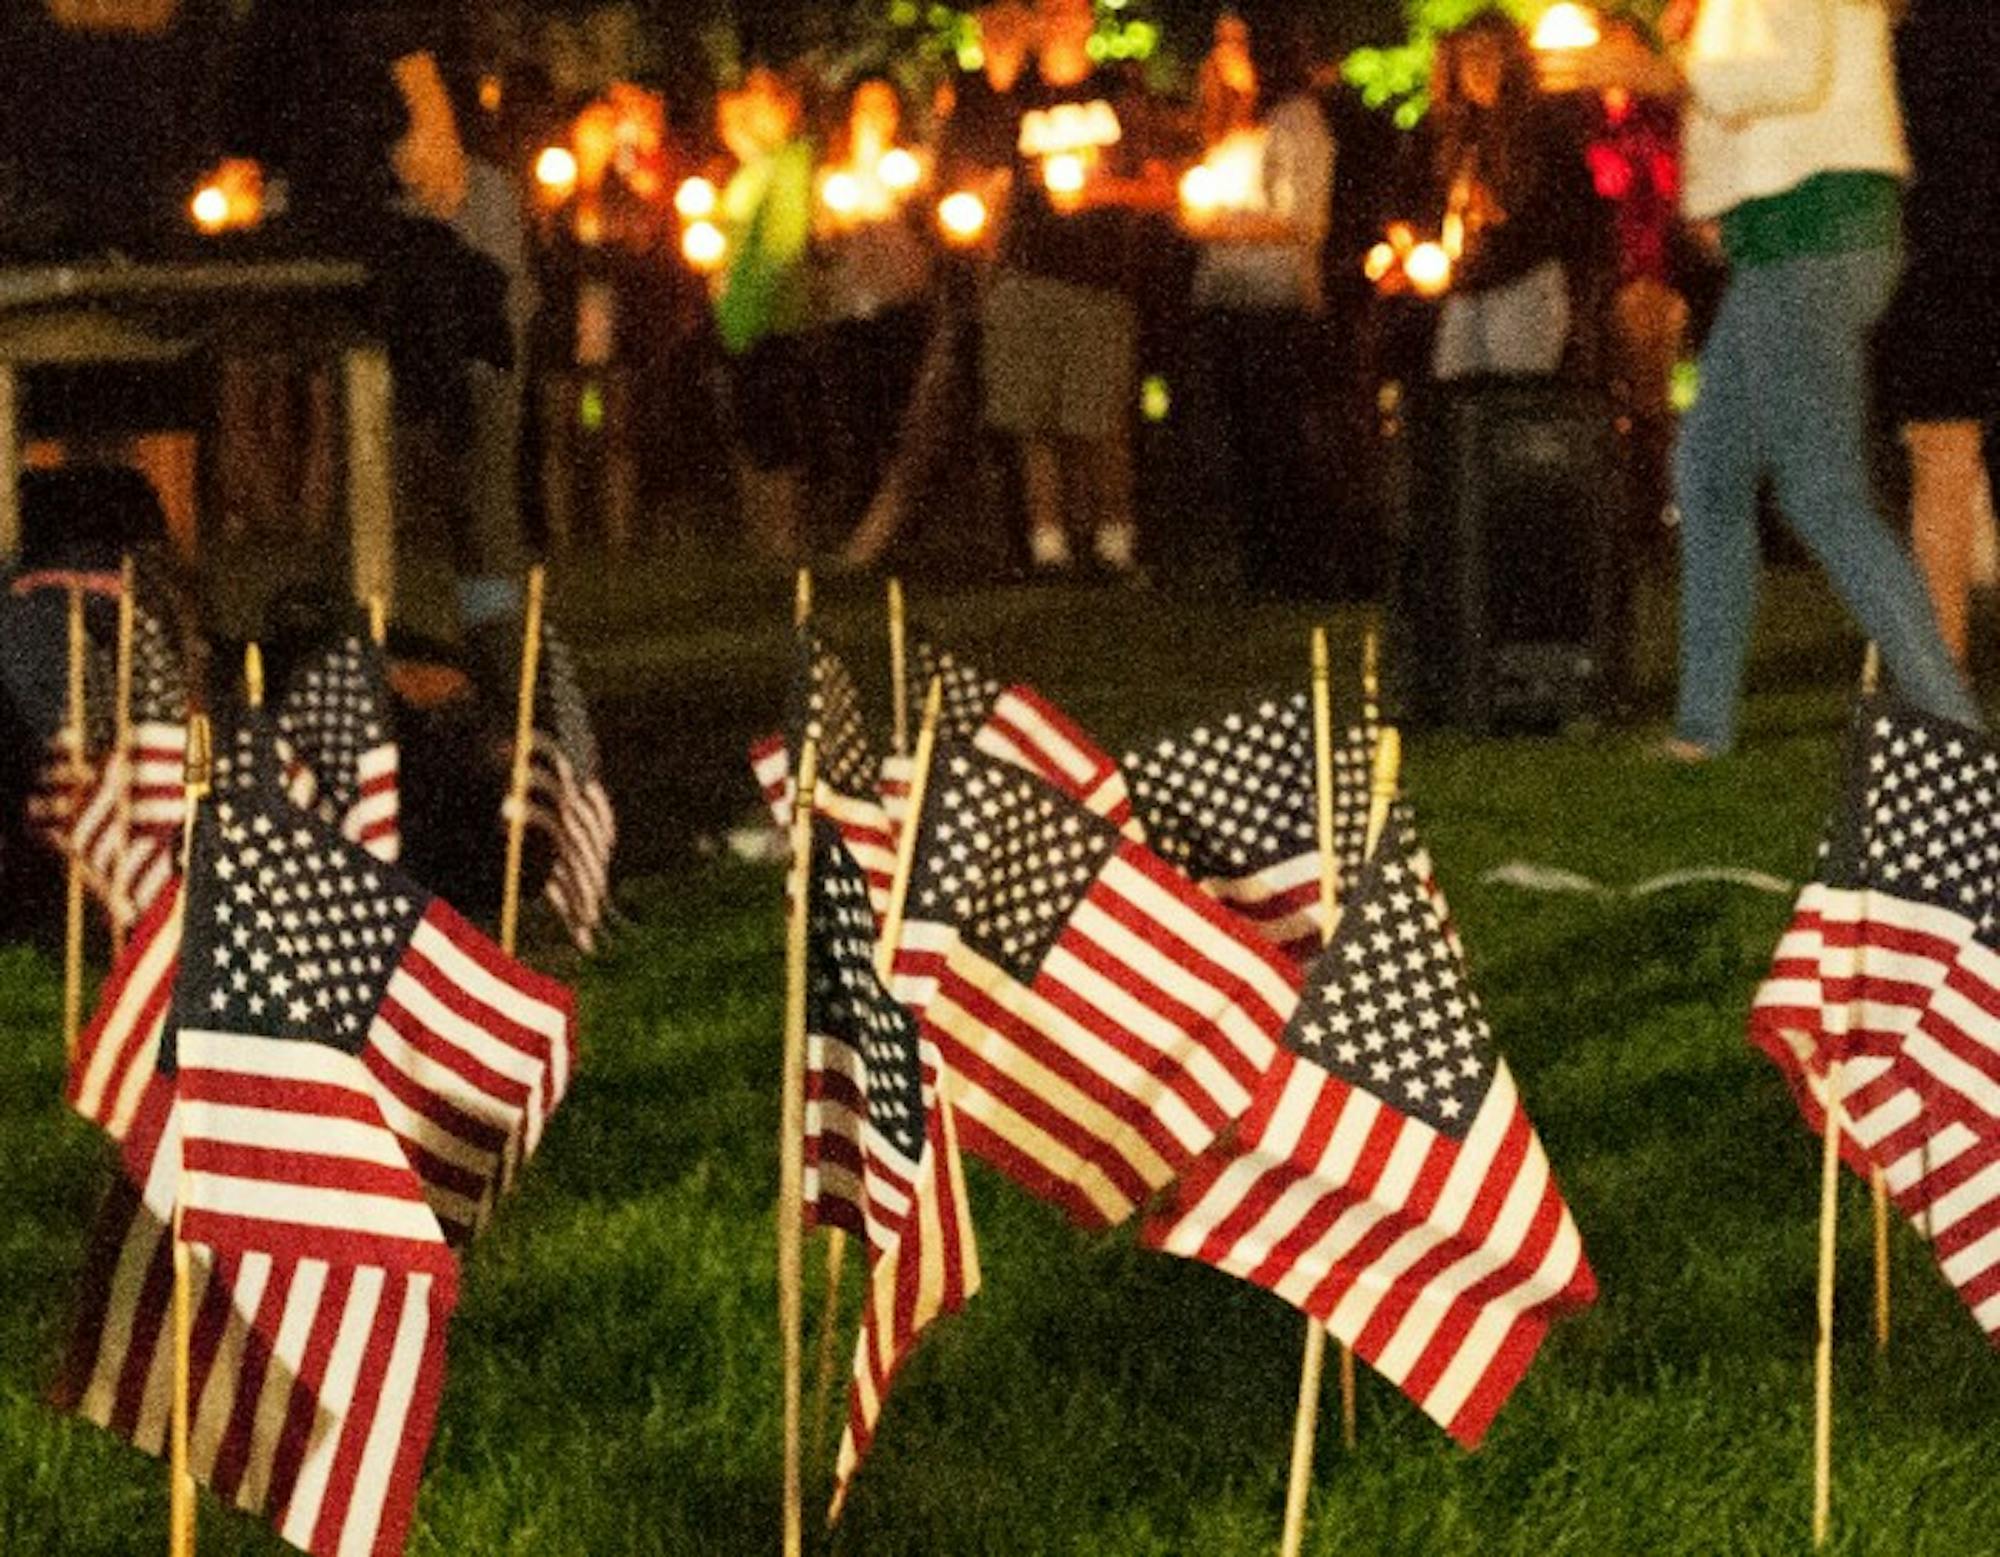 American flags adorn South Quad as student, faculty and community members gather for a candle-lit prayer service and Grotto procession led by Fr. Malloy, Notre Dame's president during 9/11.